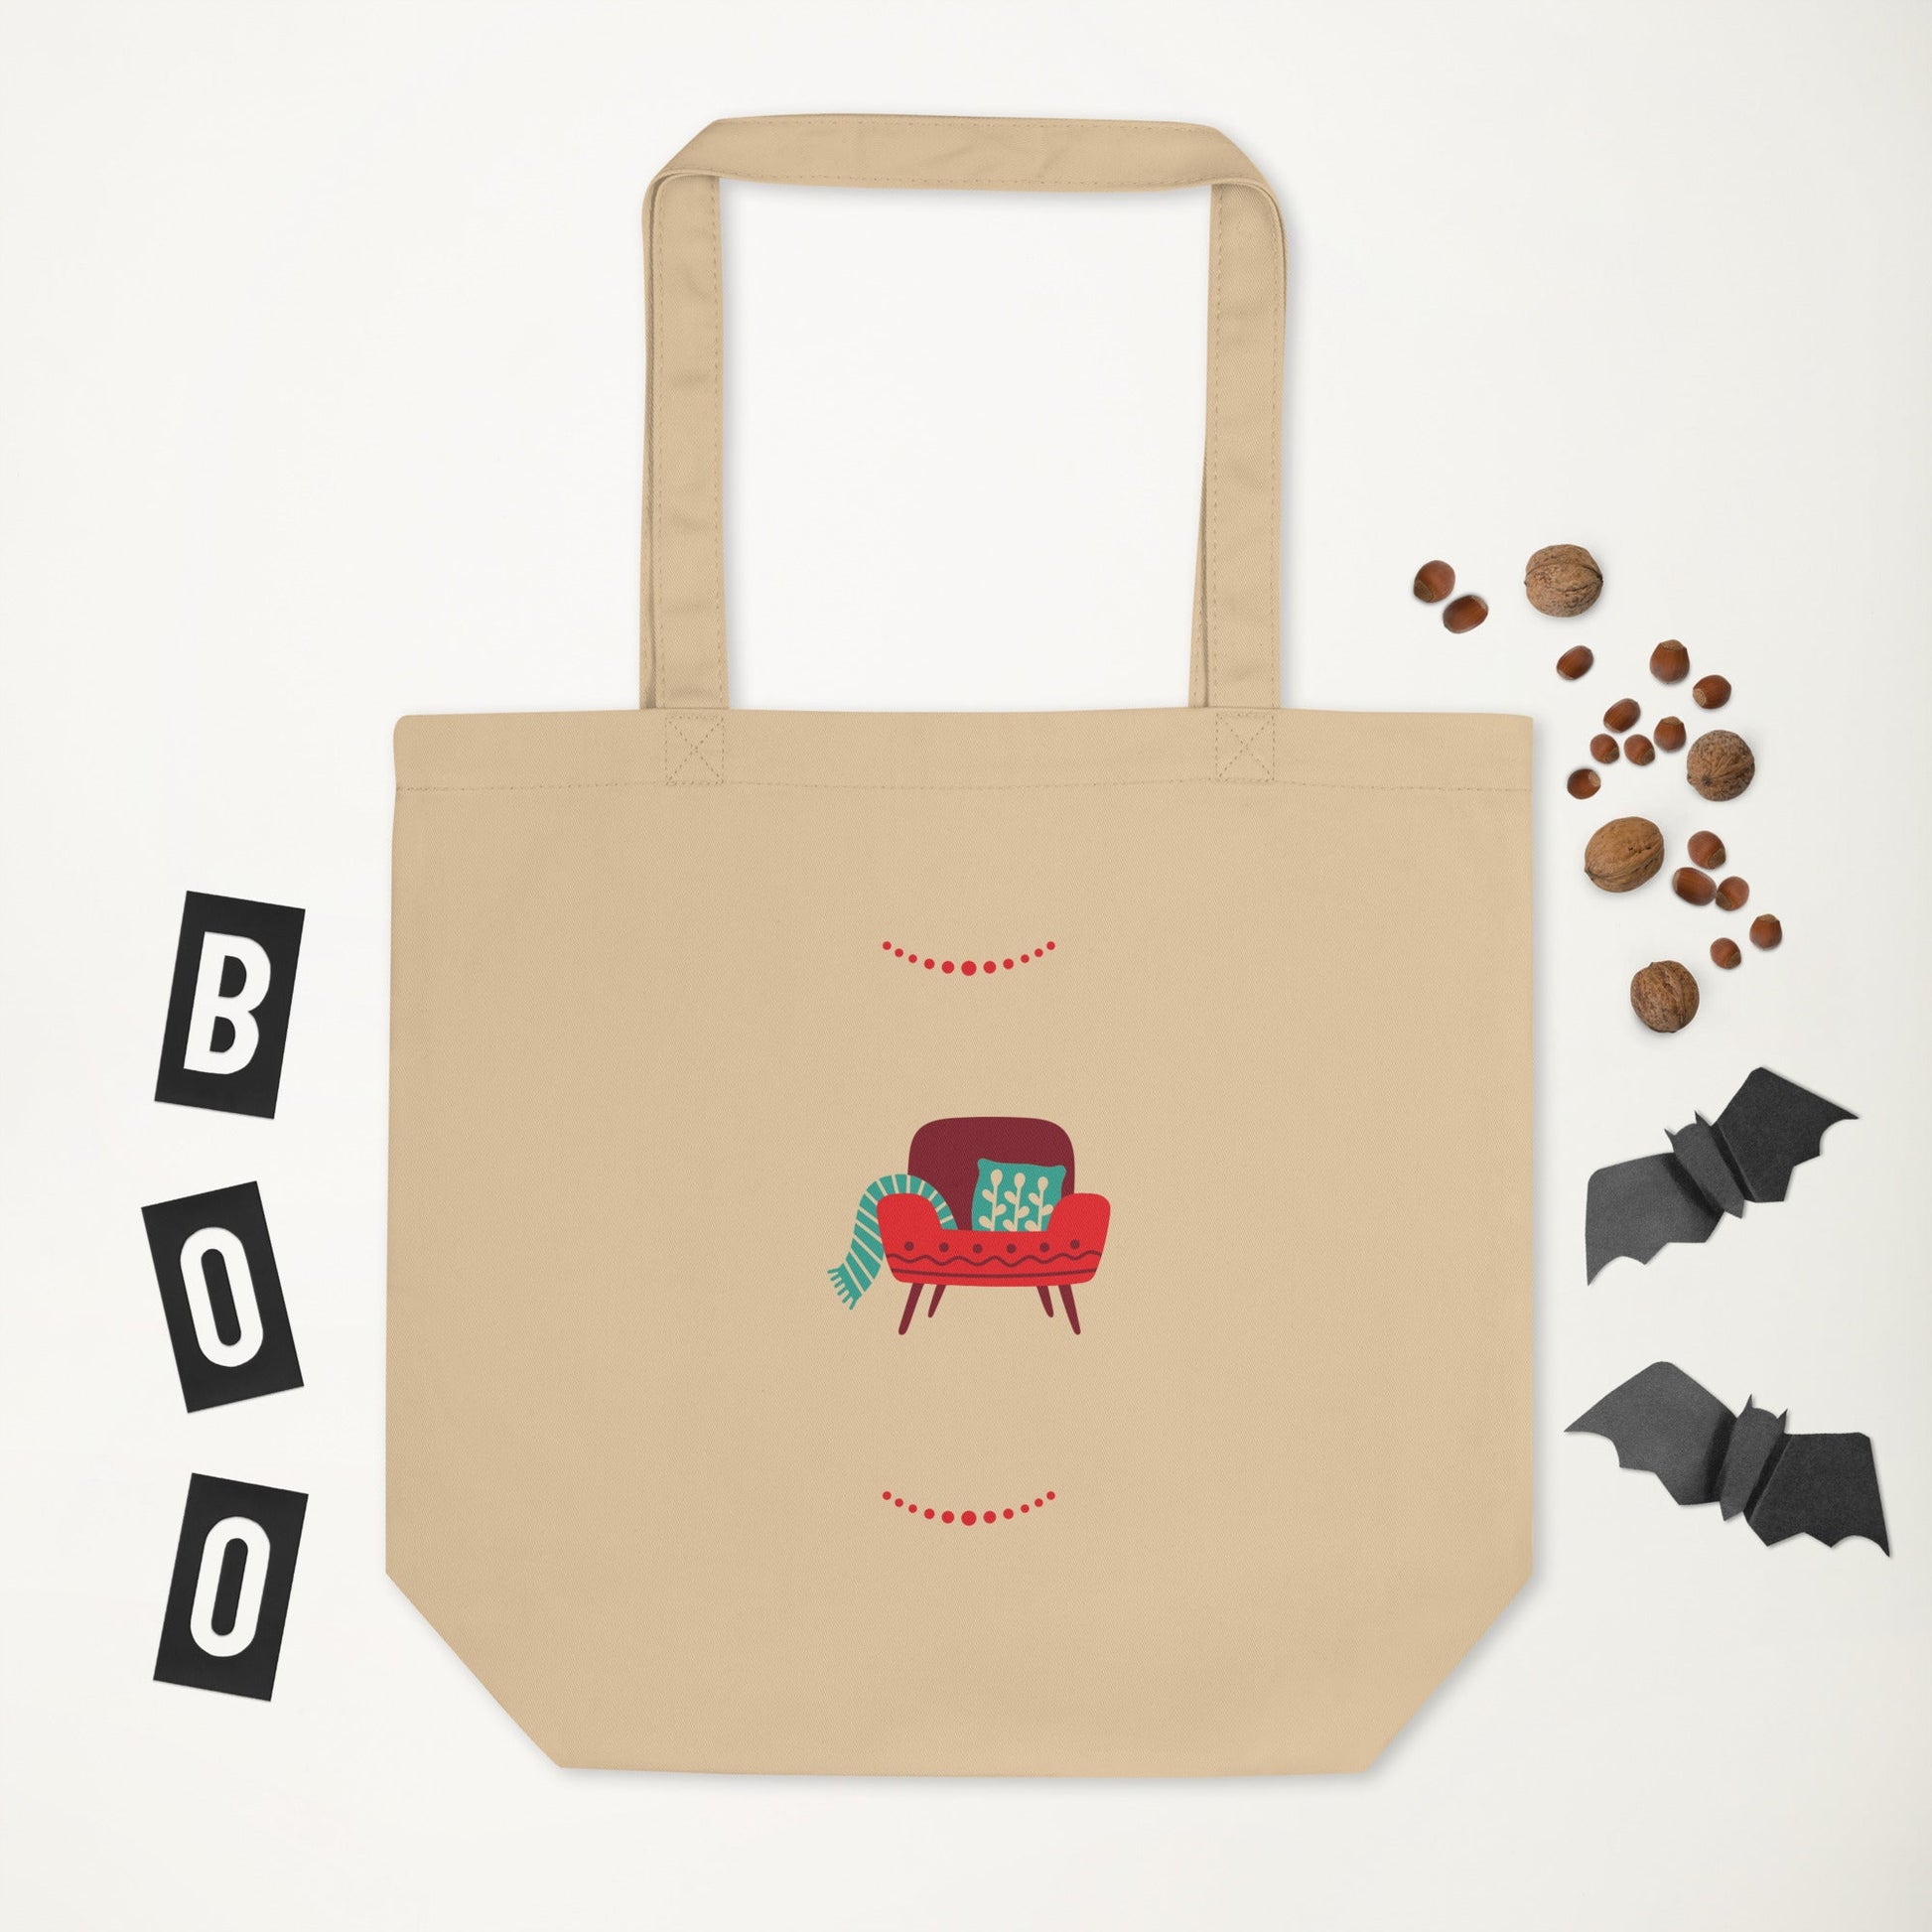 Festive and Eco-Friendly: Double-Sided Holiday Print Eco Tote Bags for the Christmas Season